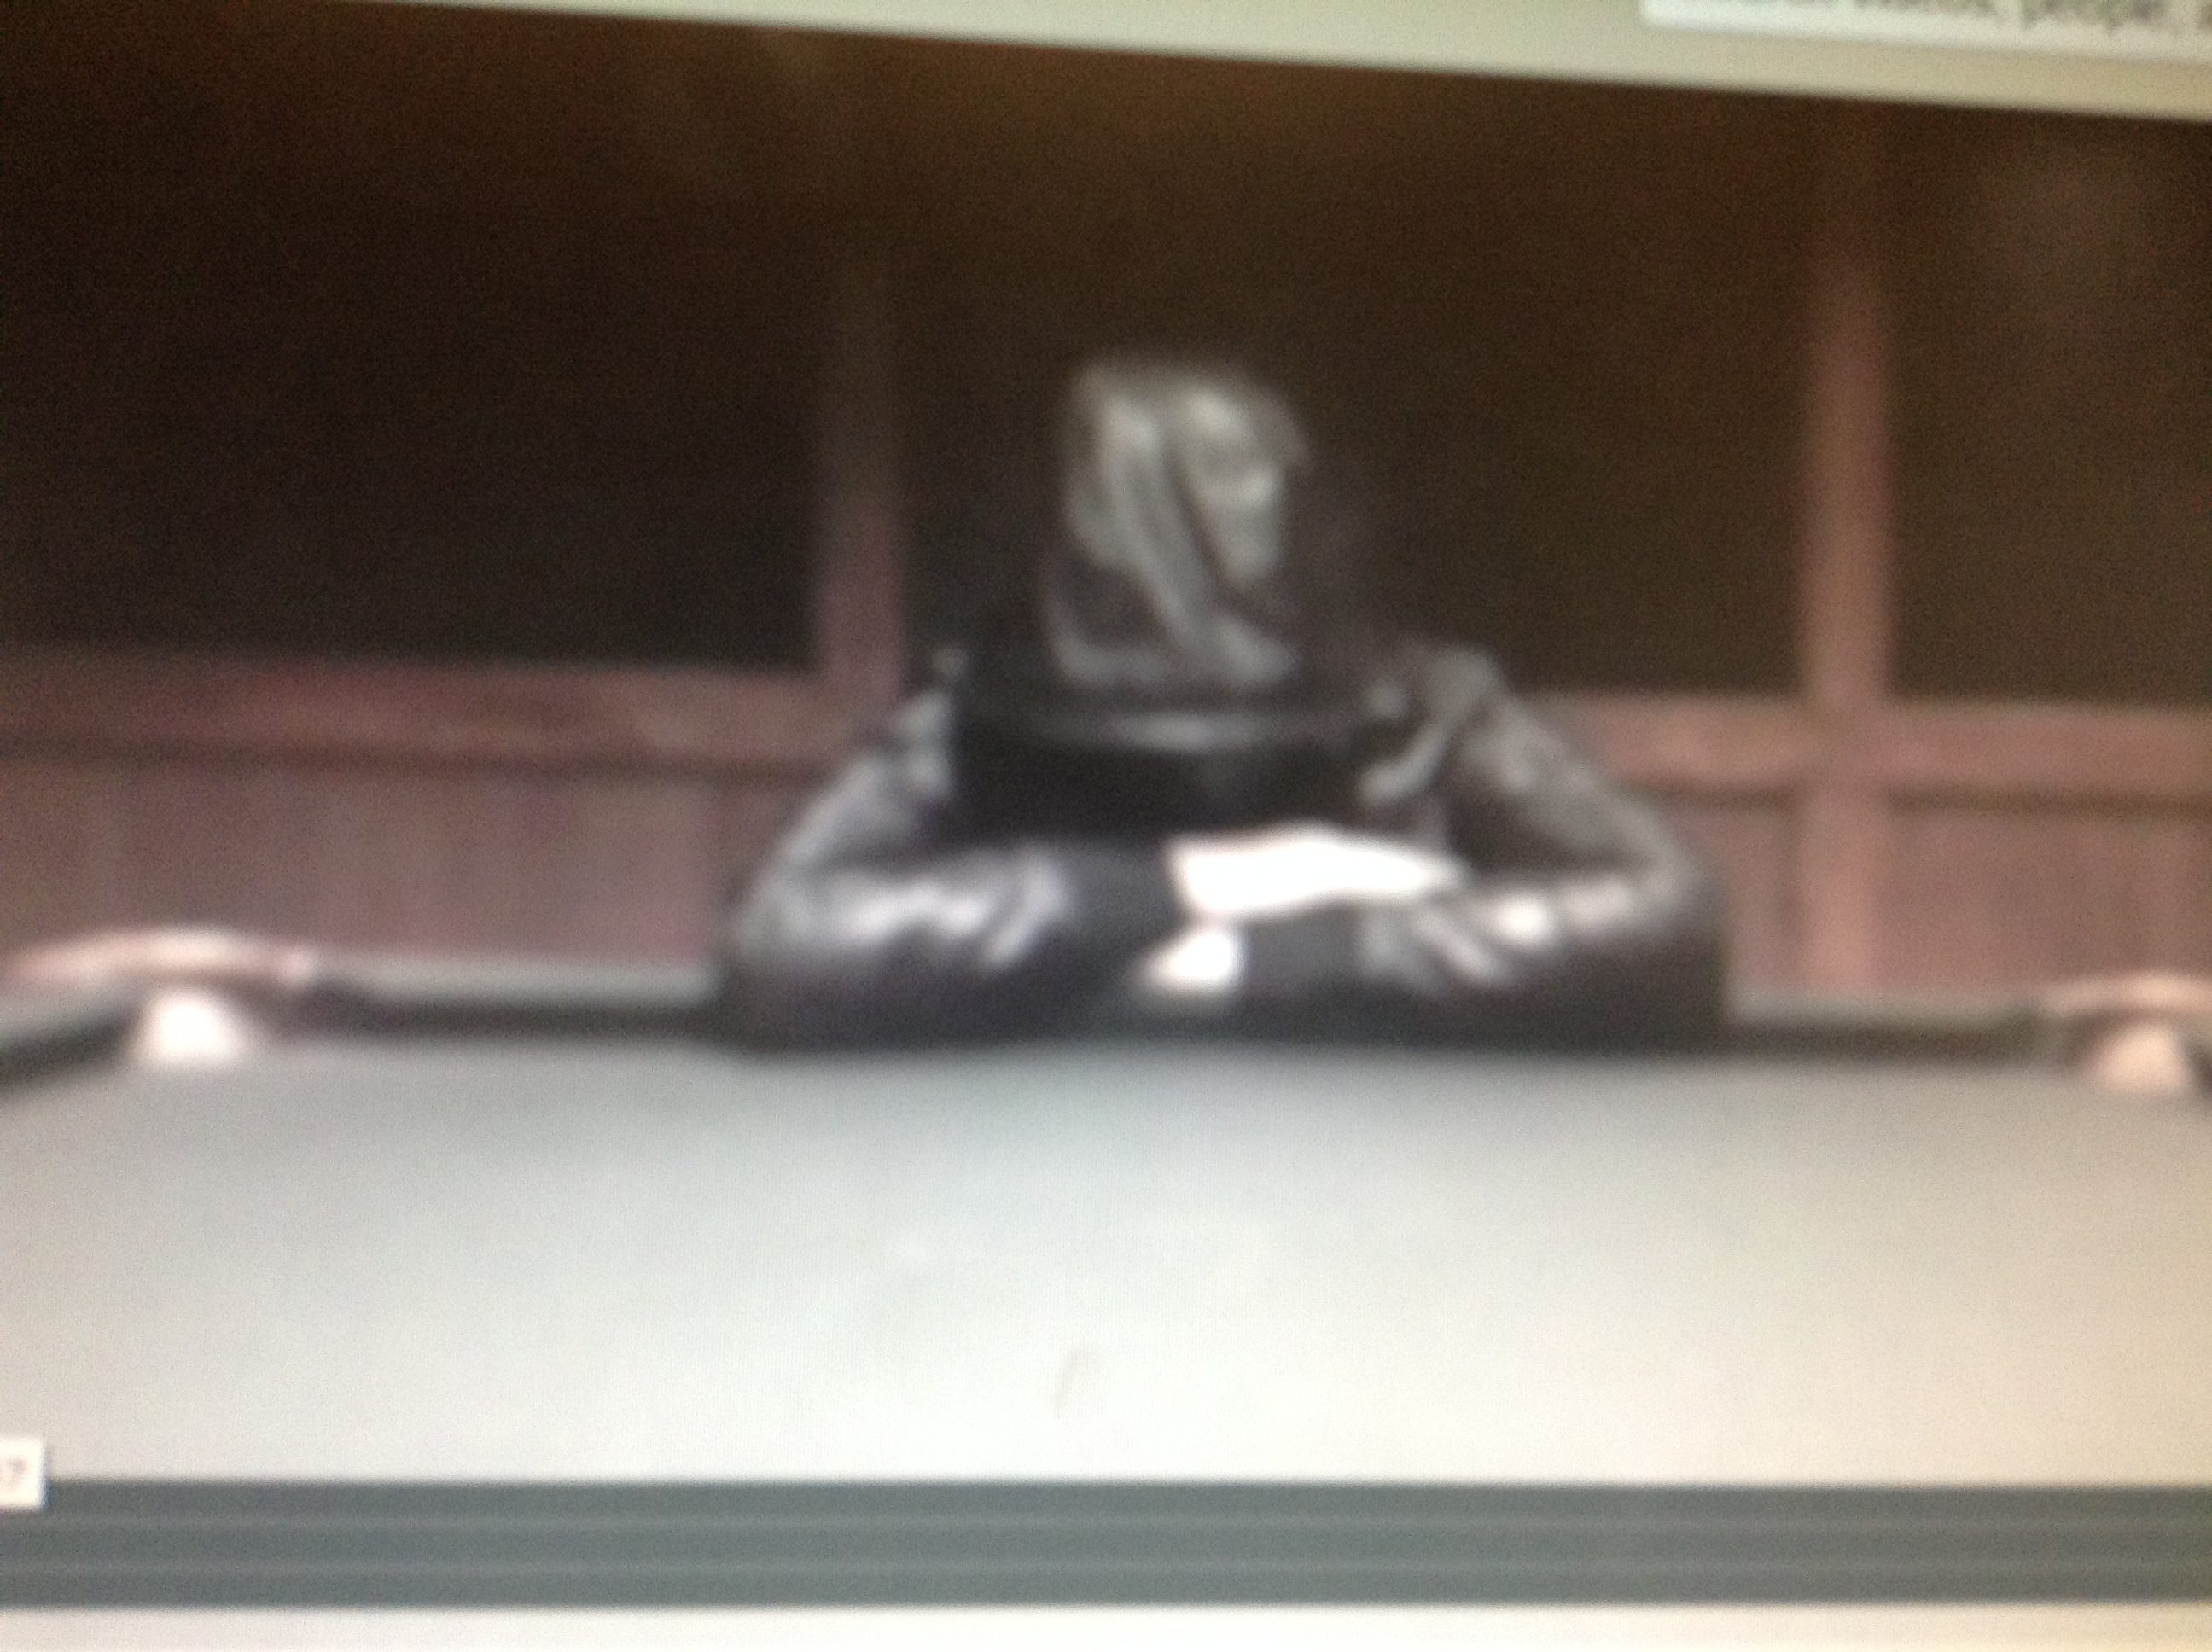 Blurred image of person in black jacket leaning cross armed and hooded leaning on pool table.